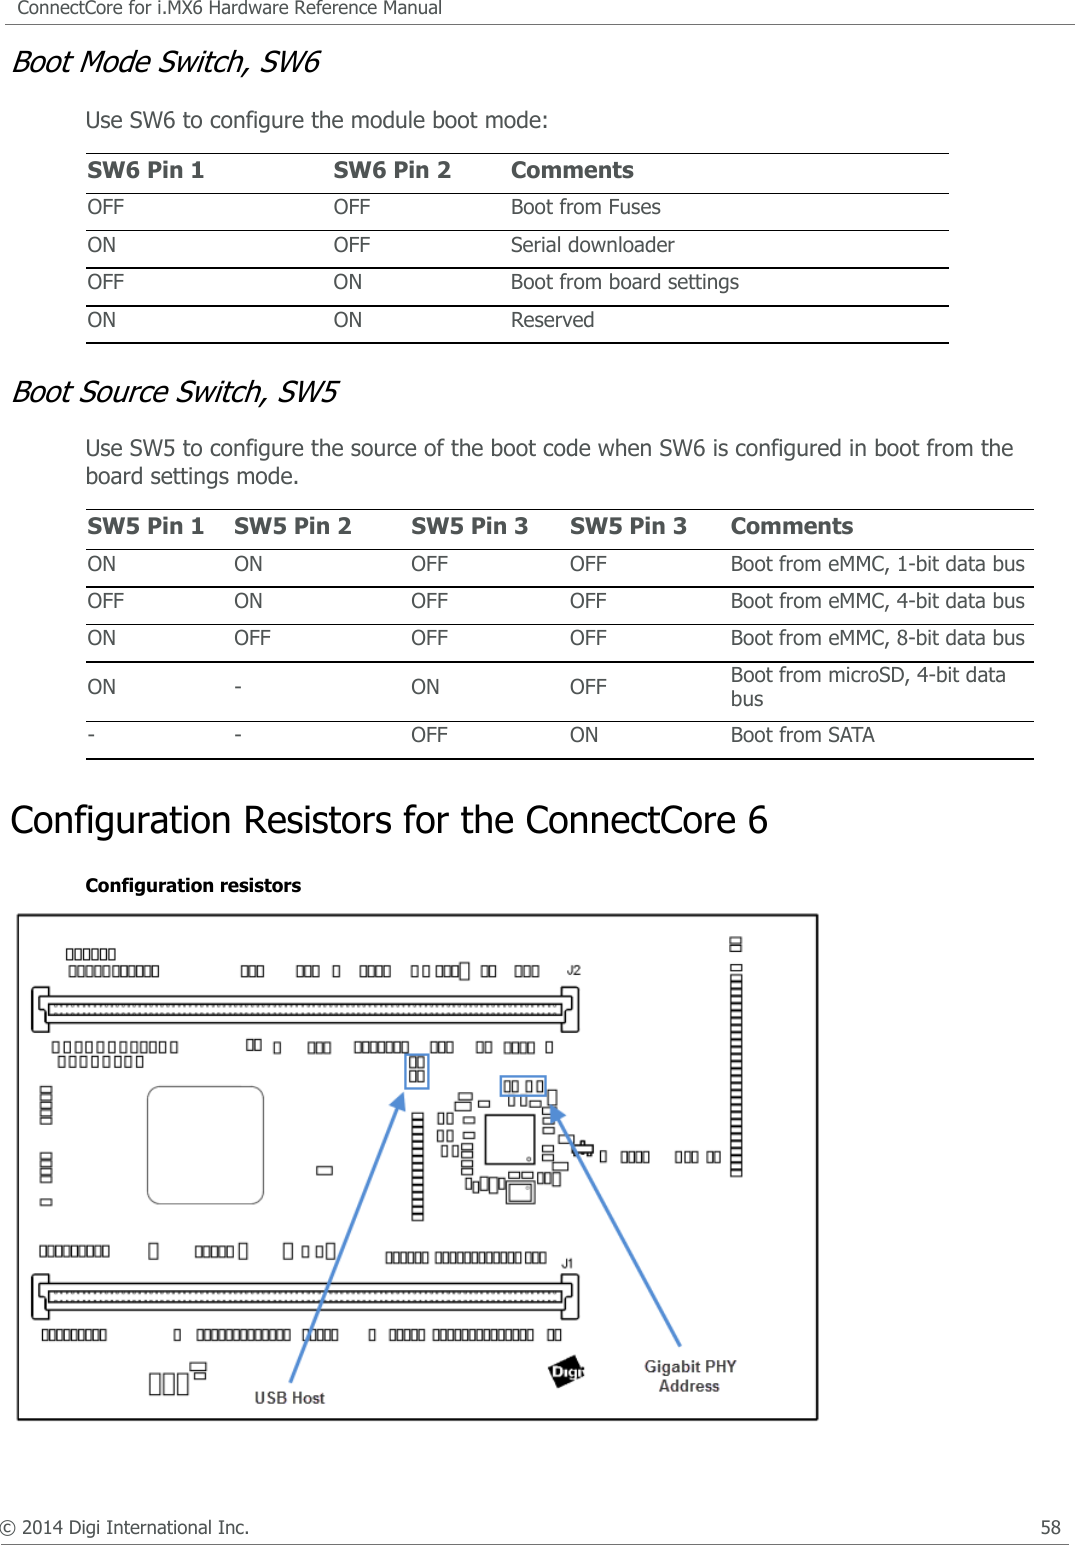 © 2014 Digi International Inc.      56ConnectCore for i.MX6 Hardware Reference ManualI2C Address TableThe ConnectCore 6 module has three I2C busses available on the module pinout. The default configuration of the adapter board uses I2C2 and I2C3 busses. The following tables show the configuration and use of these two I2C busses on the adapter board.I2C2This I2C bus is used internally on the ConnectCore 6 module. The bus is connected to the PMIC and to the Kinetis MCA, and it&apos;s used to configure and monitor the PMIC. This I2C bus is available on the module PADs, but should not be used unless absolutely necessary. A problem on this bus can cause the module to not boot correctly.Two 4K7 pull-up resistors to 3.3V are connected to the I2C2 lines on the ConnectCore 6 module.The following table shows the interfaces connected to the I2C2 bus.I2C3The I2C bus is not used internally on the ConnectCore 6 module. Two 2K2 pull-up resistors to 3.3V are connected to the I2C3 lines on the adapter board.NAND_D6 GPIO2_6 EIM IRQNAND_D7 GPIO2_7 JSCCWMX53 DIGIO0EIM_CSI GPIO2_24 JSCCWMX53 DIGIO1EIM_EB0 GPIO2_28 JSCCWMX53 DIGIO2EIM_EB1 GPIO2_29 JSCCWMX53 DIGIO3EIM_DA10 GPIO3_10 USB Hub resetEIM_DA15 GPIO3_15 CSI1 Reset / Key Col 7EIM_WAIT GPIO5_0 CSI0 Reset / Key Row 7EIM_BCLK GPIO6_31 MIPI Backlight controlSD3_DAT2 GPIO7_6 MIPI GPIOSD3_DAT3 GPIO7_7 PCIe Mini Card Wake upSD3_RST GPIO7_8 PCIe Mini Card ResetGPIO_16 GPIO7_11 LVDS1 Touch IRQInterface Speed (Kbps) AddressKinetis MCA 400 SW configurablePMIC 400 Write: 0xB0Read: 0xB1Module PADs 400